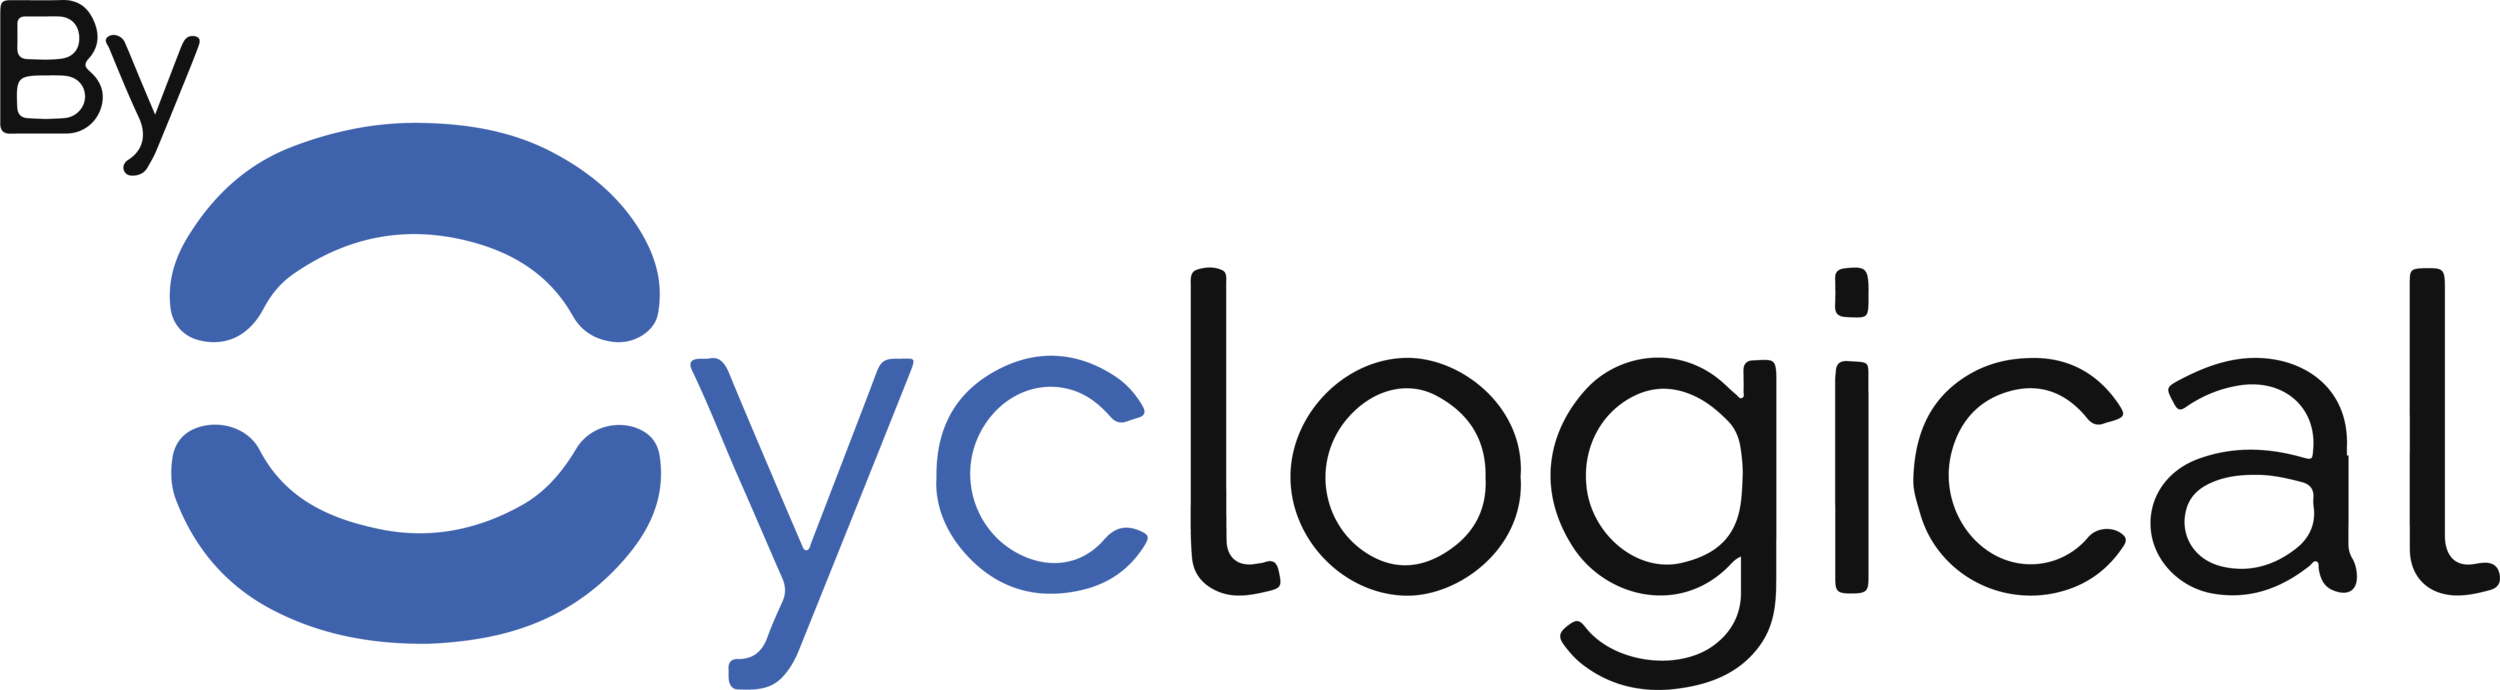 By Cycological logo.png